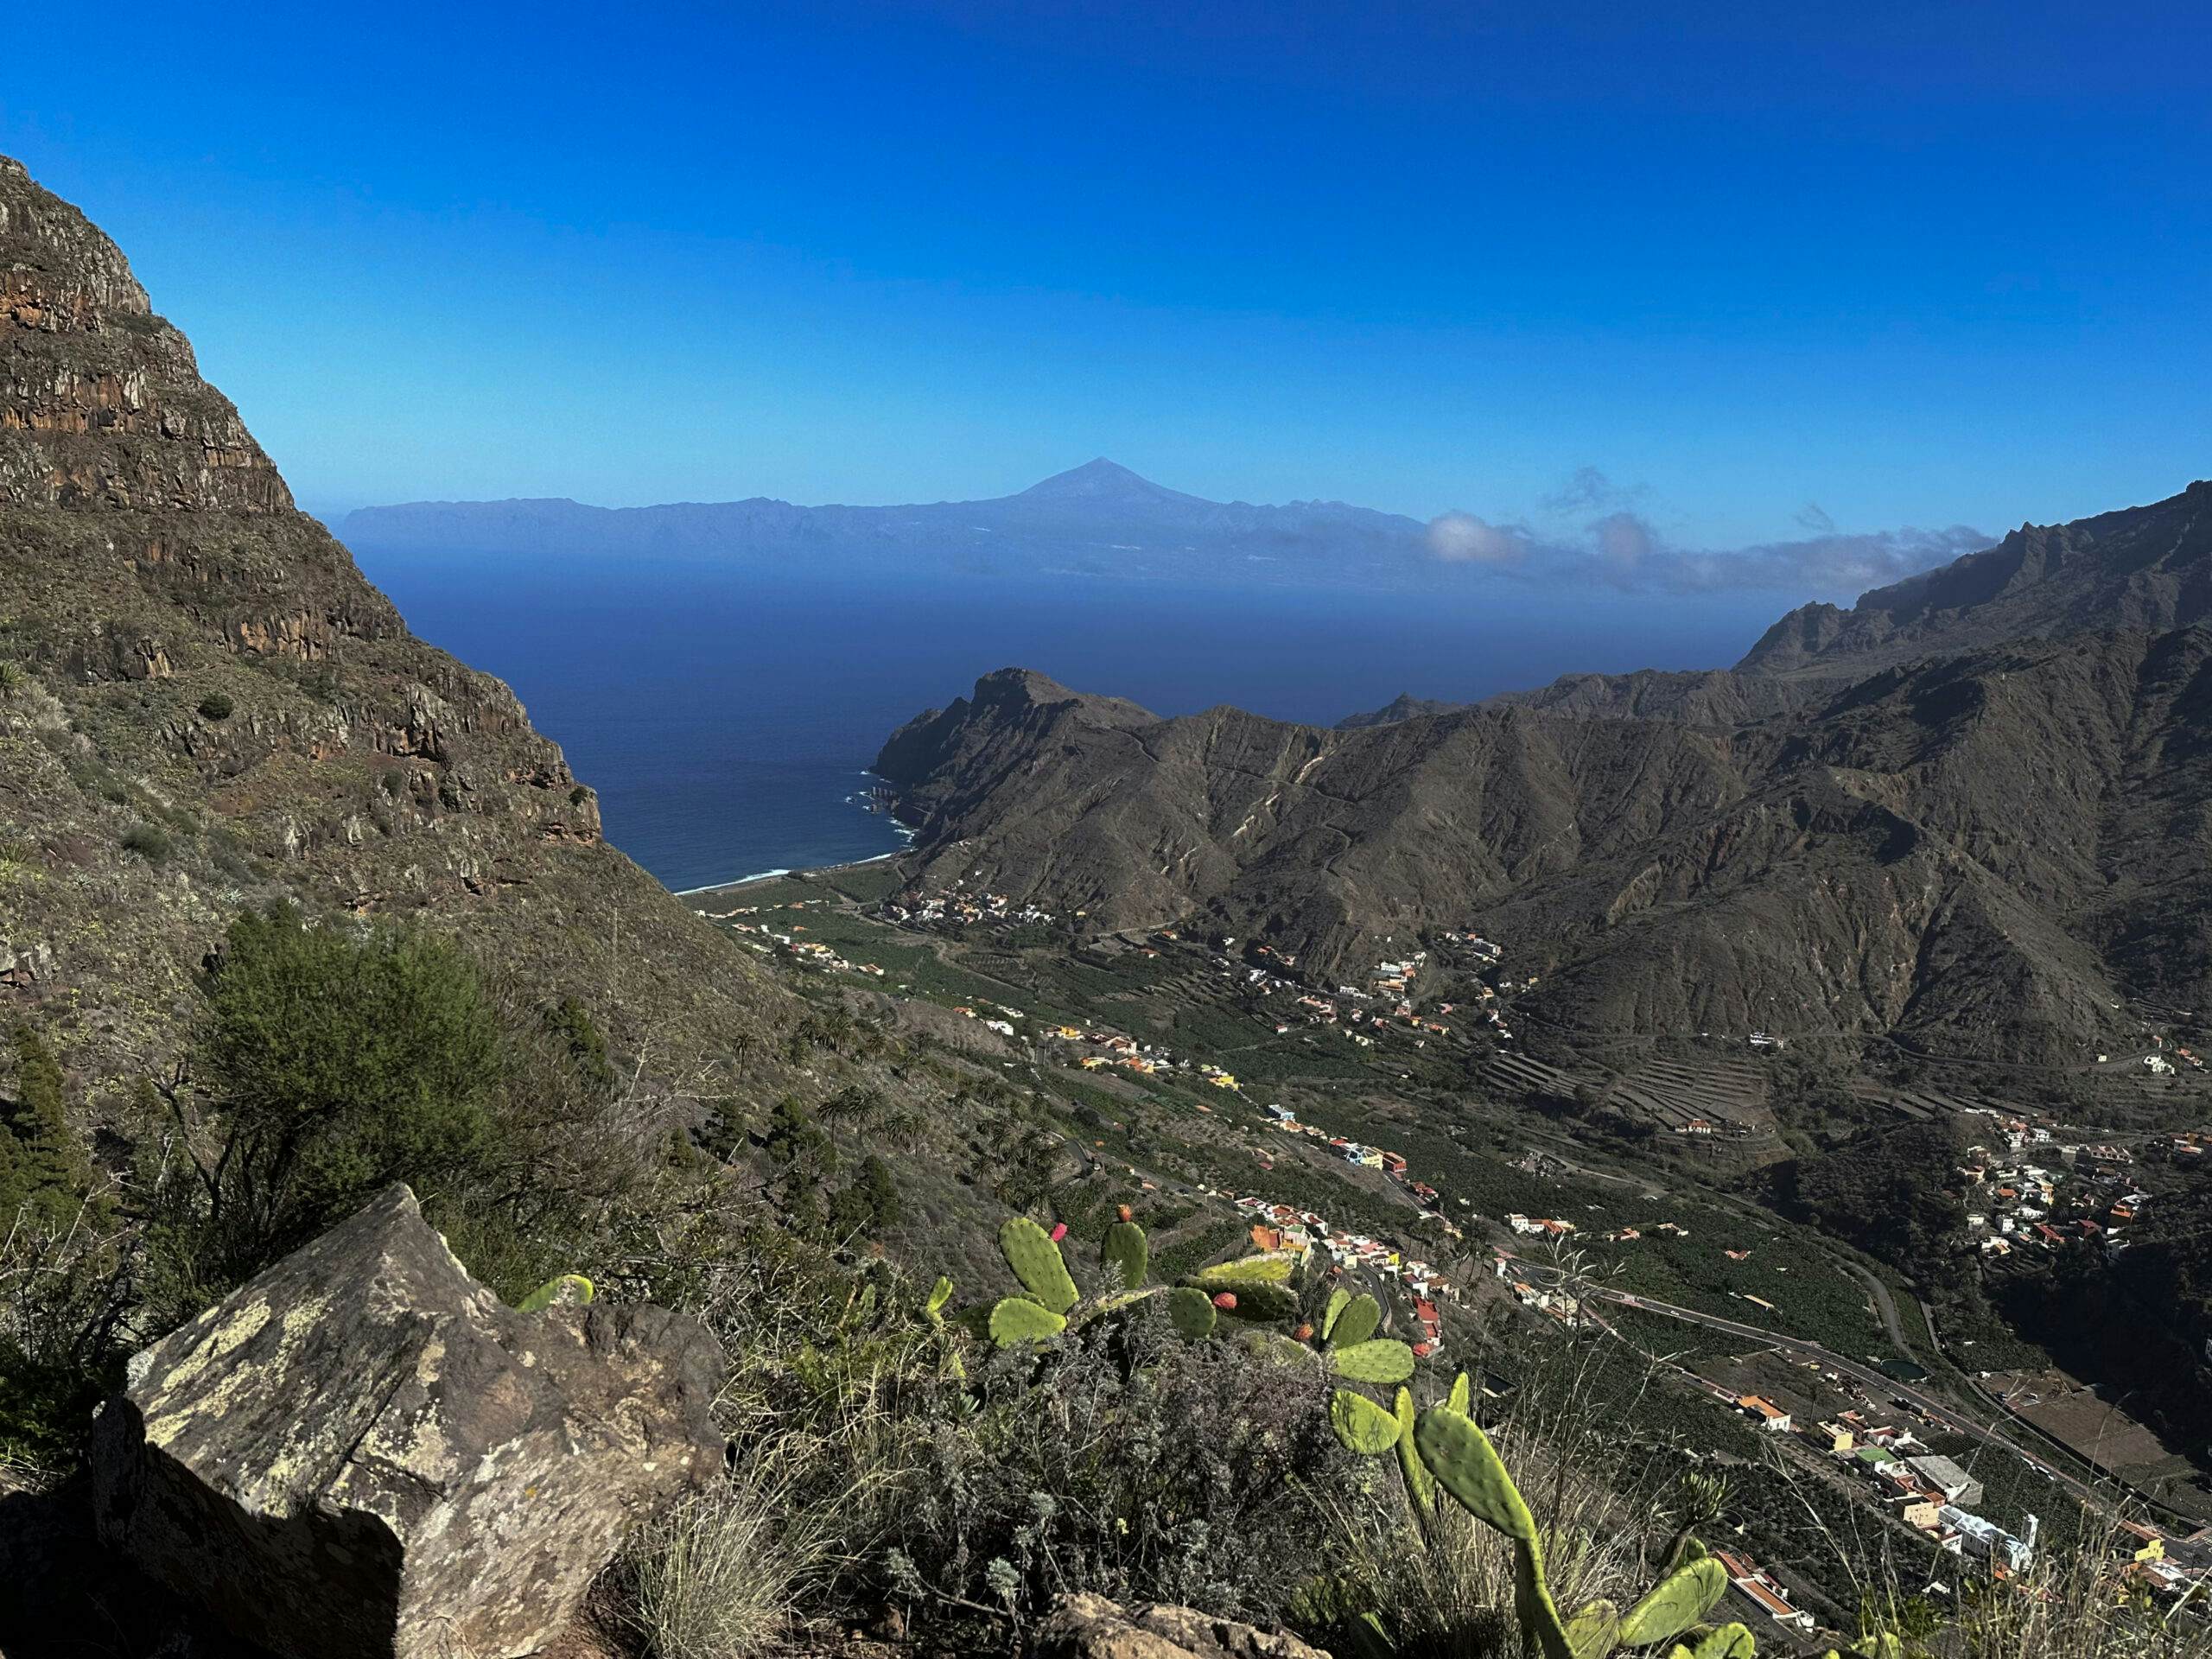 View of Hermigua and Tenerife with Teide in the background from the descent path